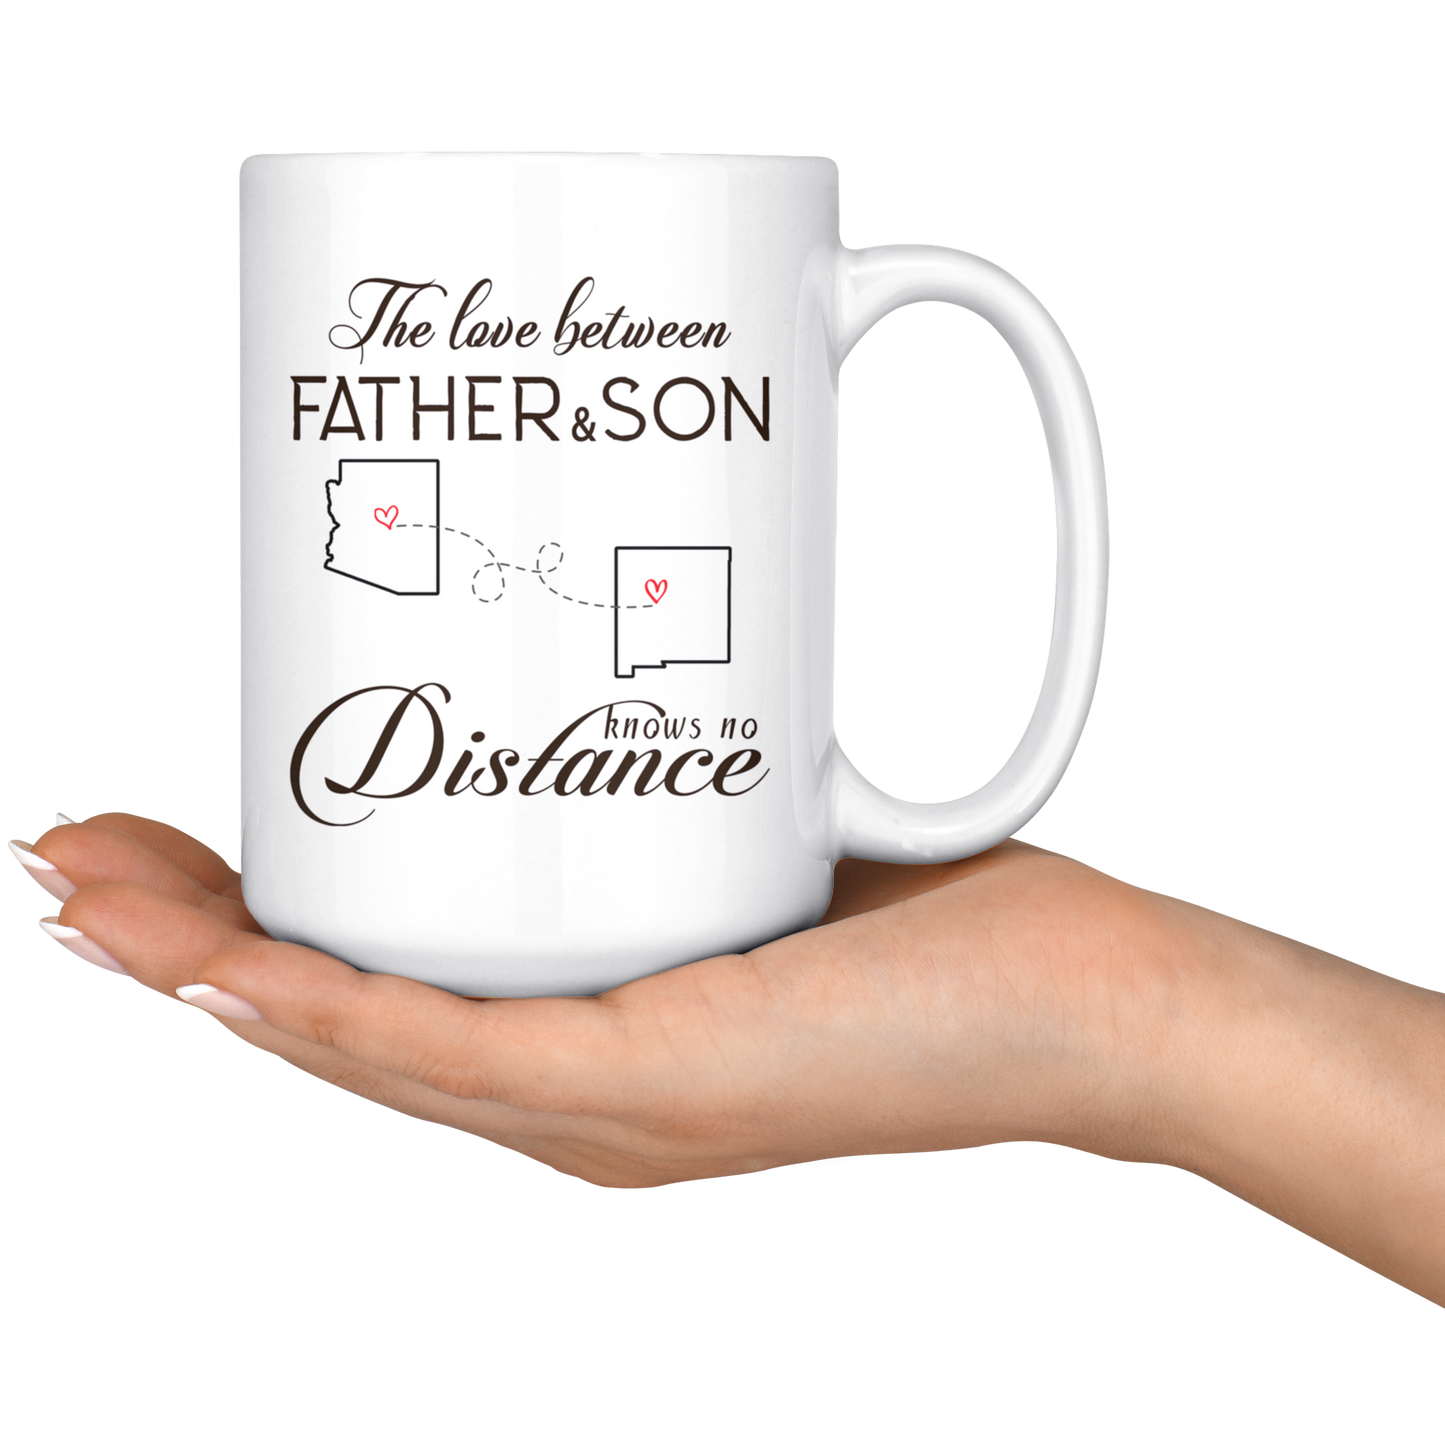 ND20407750-sp-27522 - [ Arizona | New Mexico | 1 ] (mug_15oz_white) Fathers Day Gift From My Son Mug - The Love Between Father A